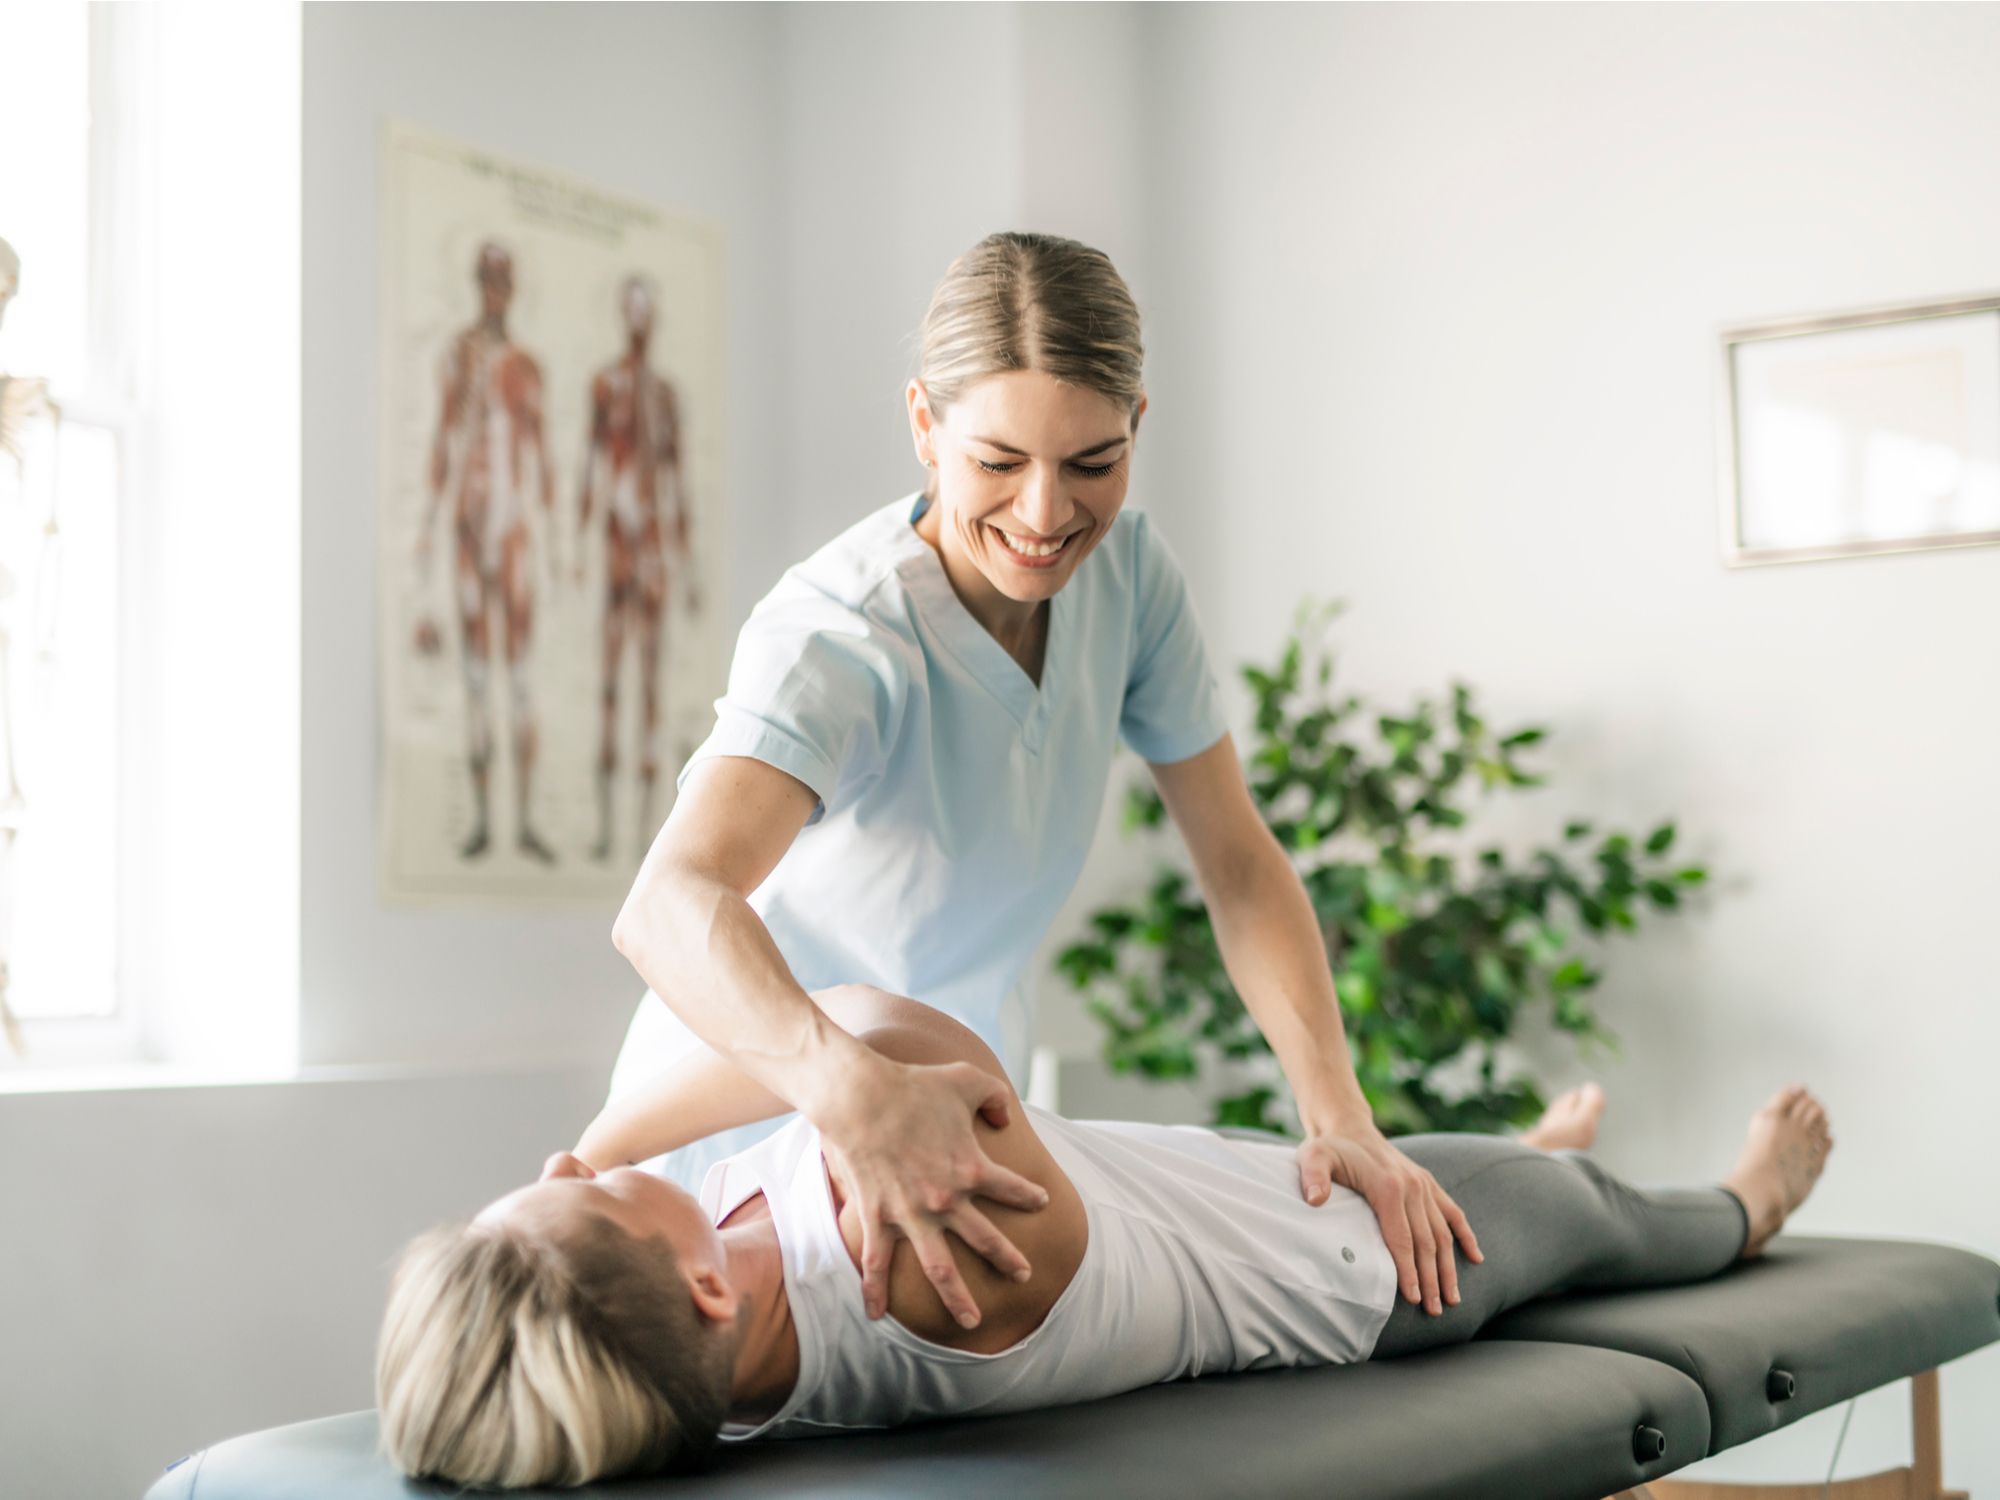 Top 5 Reasons to See a Chiropractor After an Auto Injury